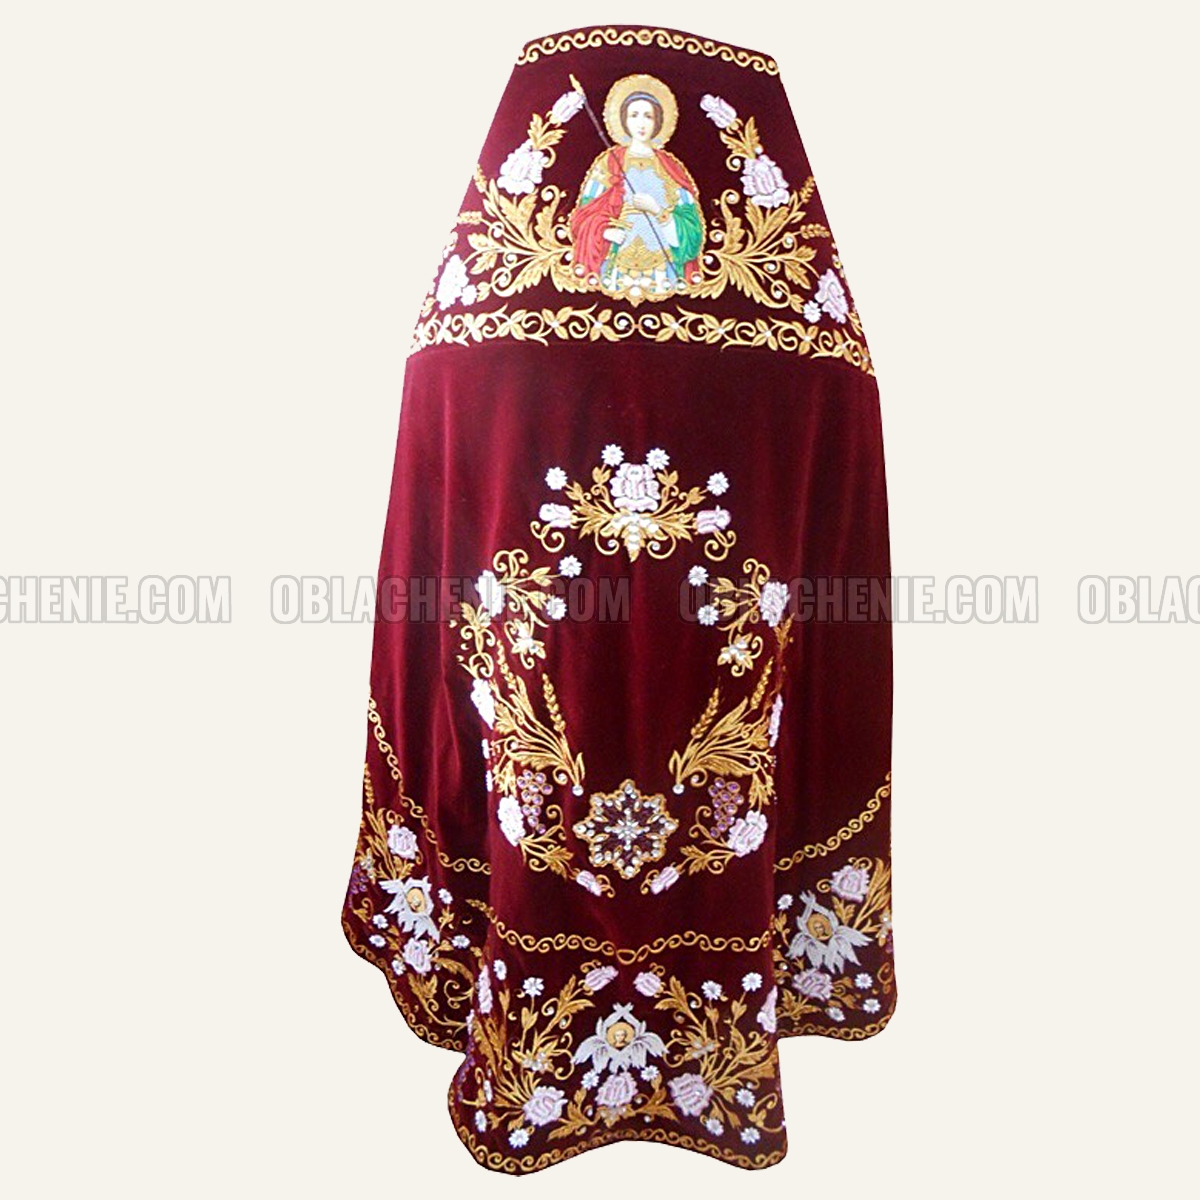 Embroidered priest's vestments 10219